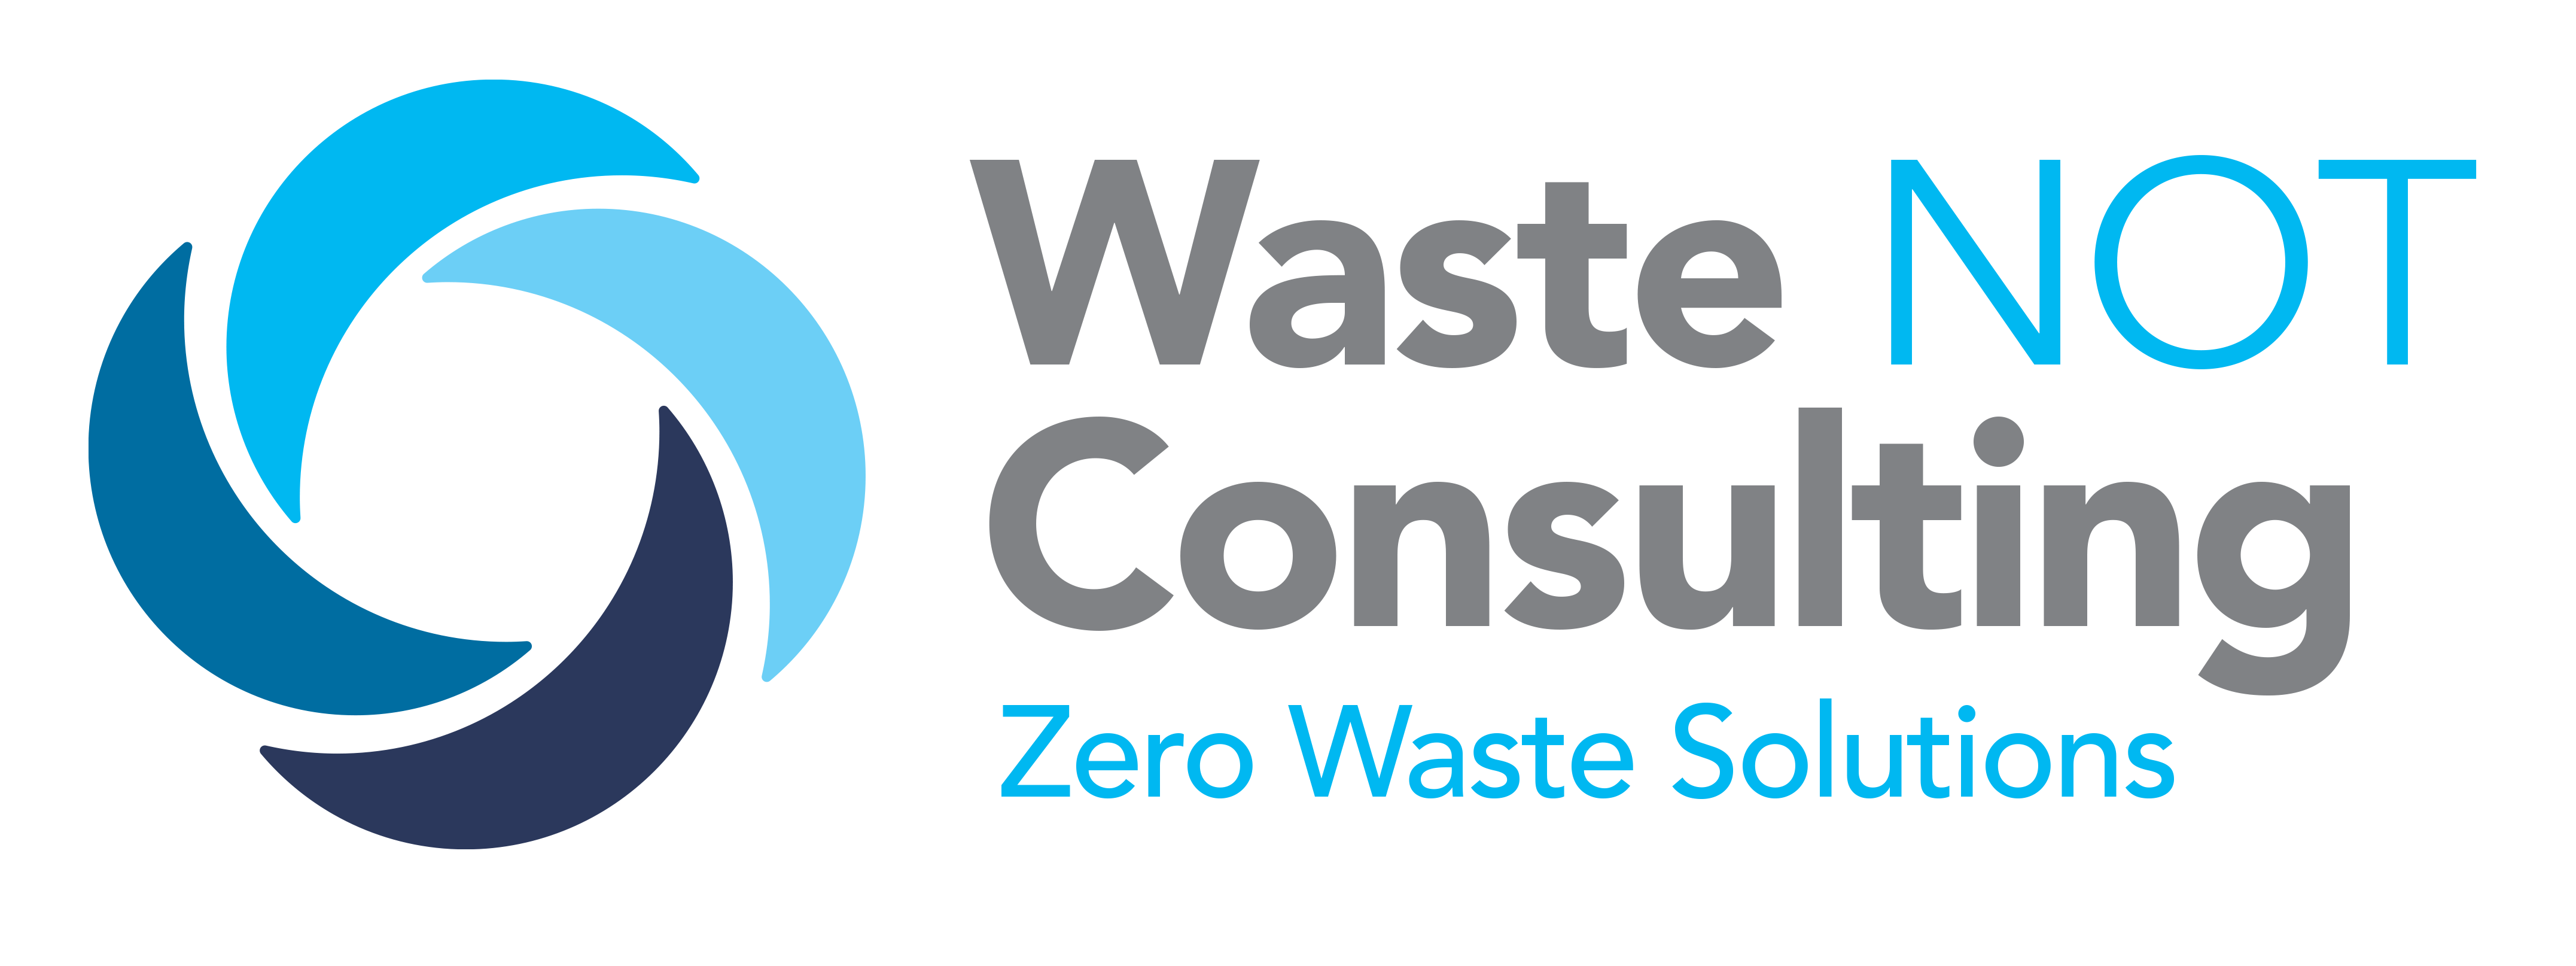 Waste Not Consulting